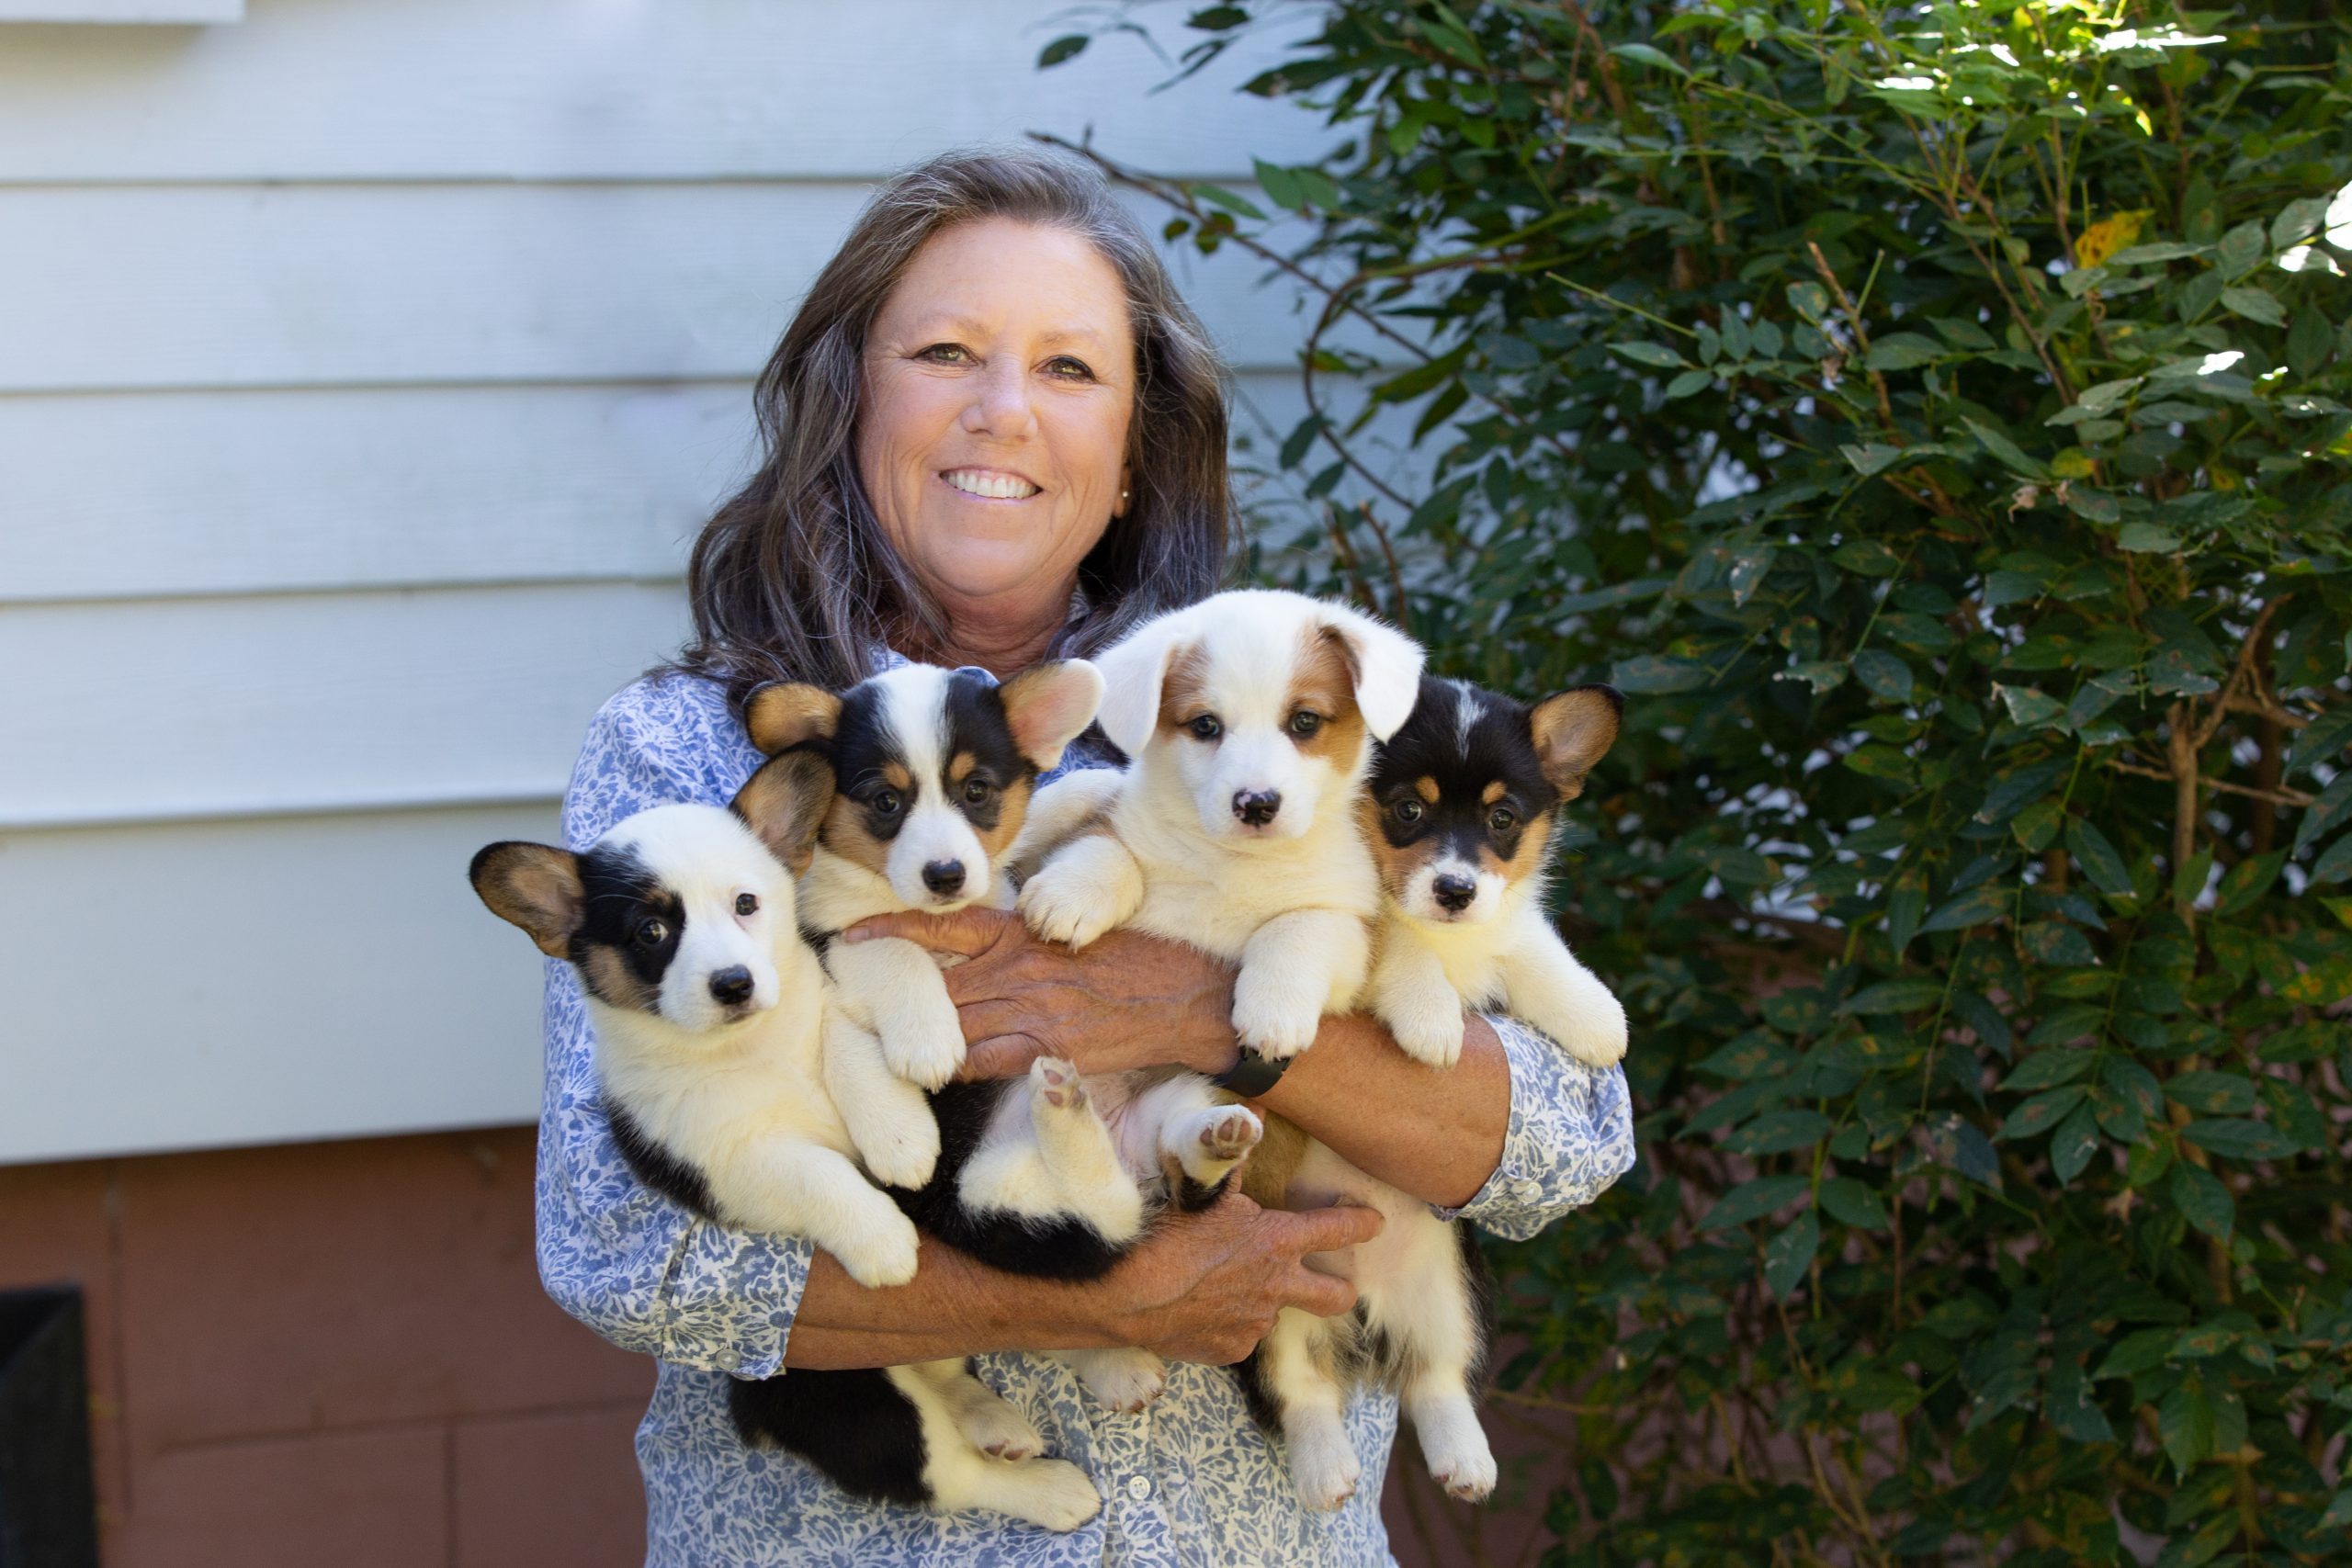 Kathy enjoys Corgi Betsy’s four puppies from her litter this past July — joy abounds! The McCaskills kept one puppy from last year’s litter, but sadly no keepers this time around.  Photography courtesy of Julie Jackson Prickett